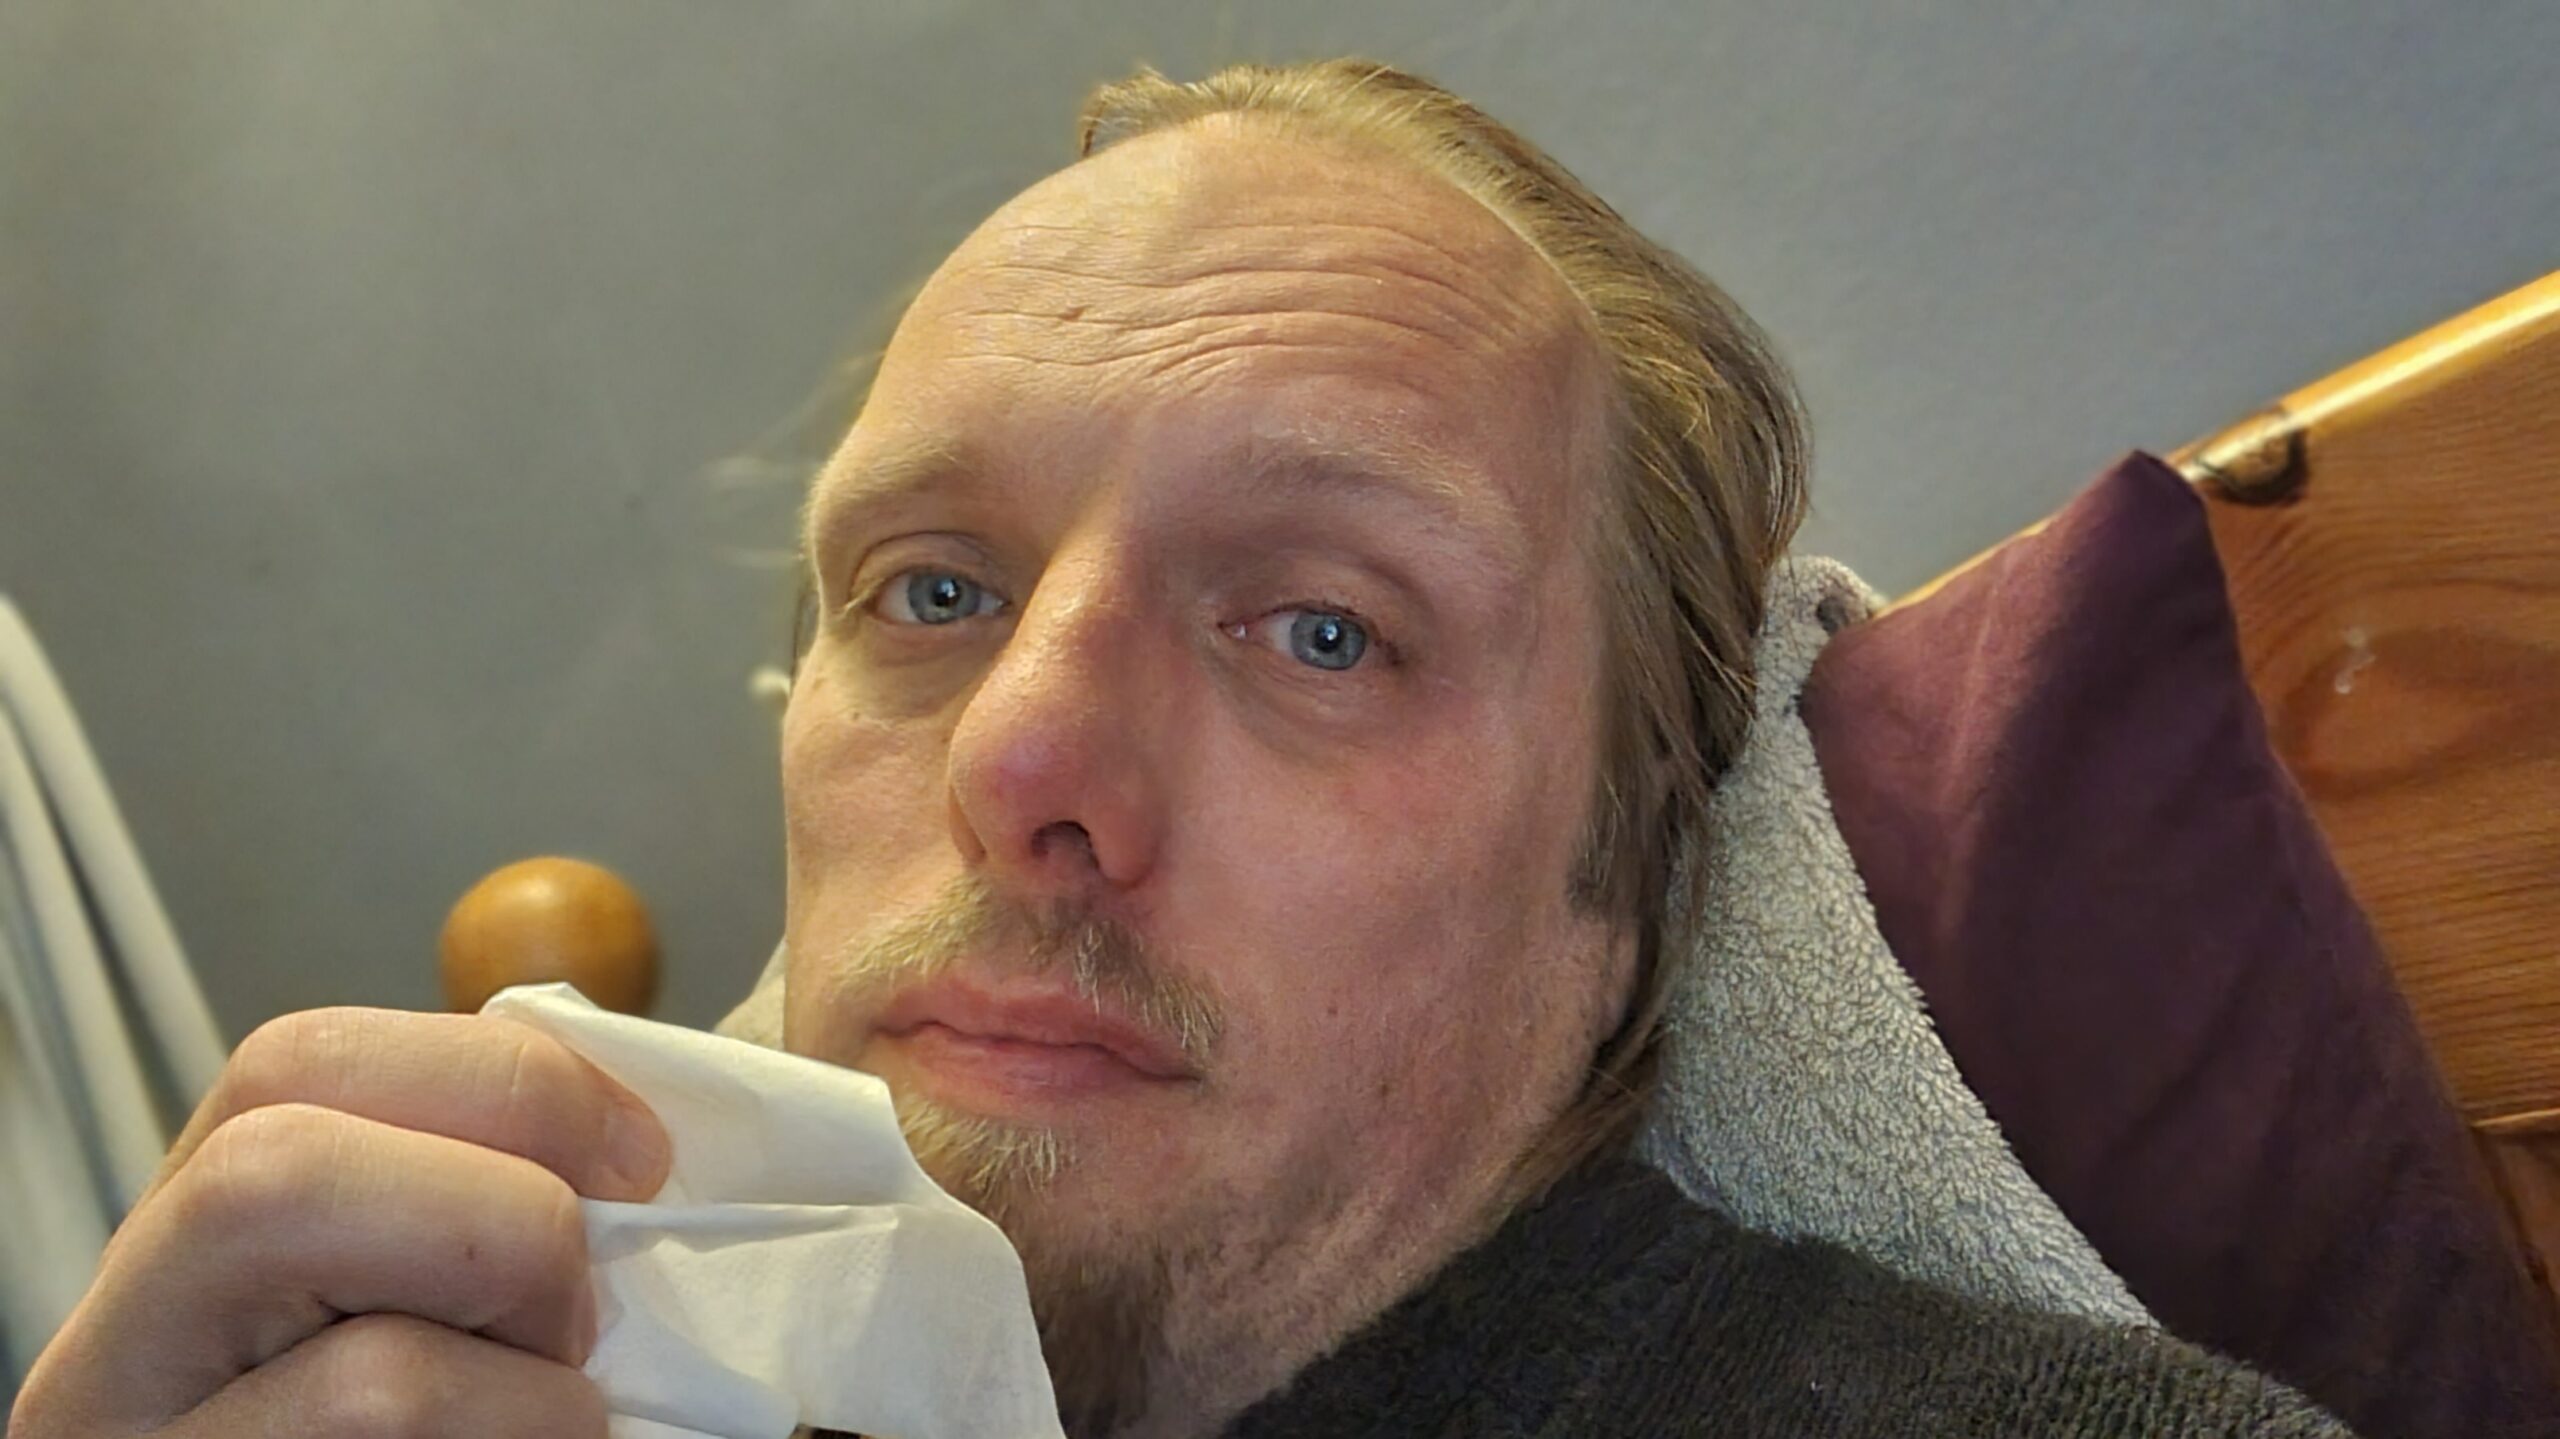 Dan, sitting in bed, holding a tissue and looking unwell.